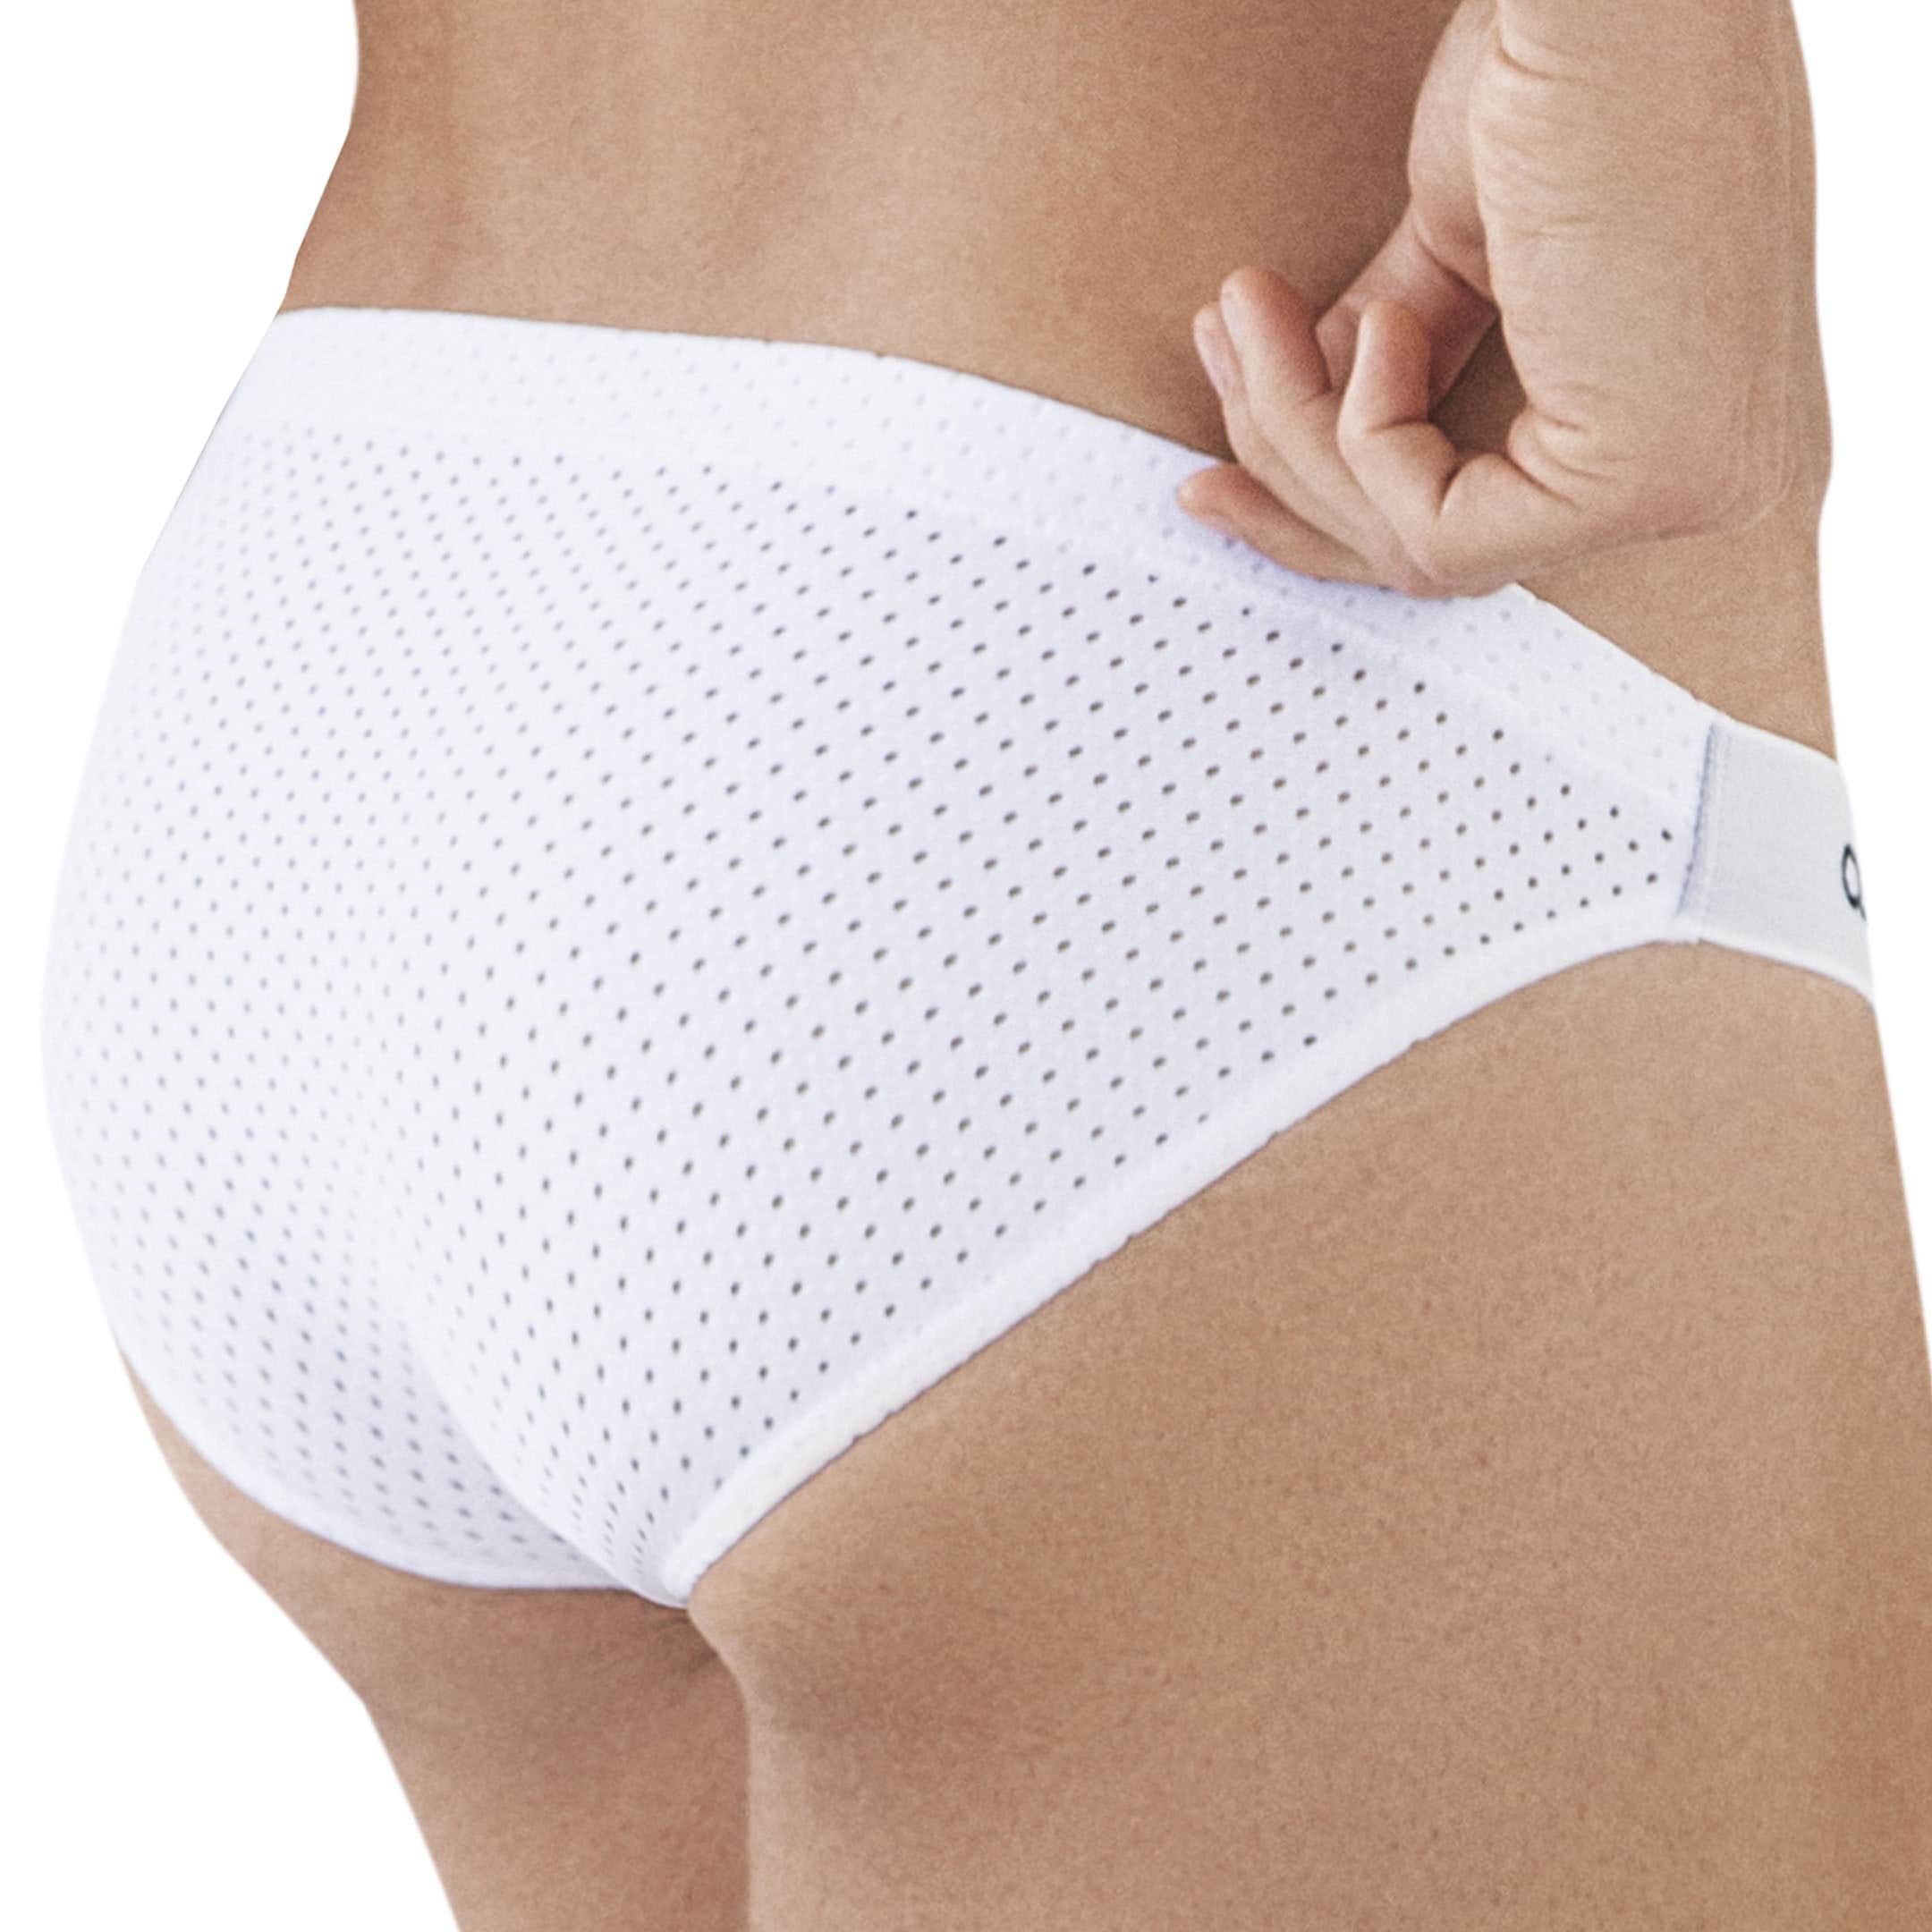 Stylish white Clever mens brief - Menwantmore